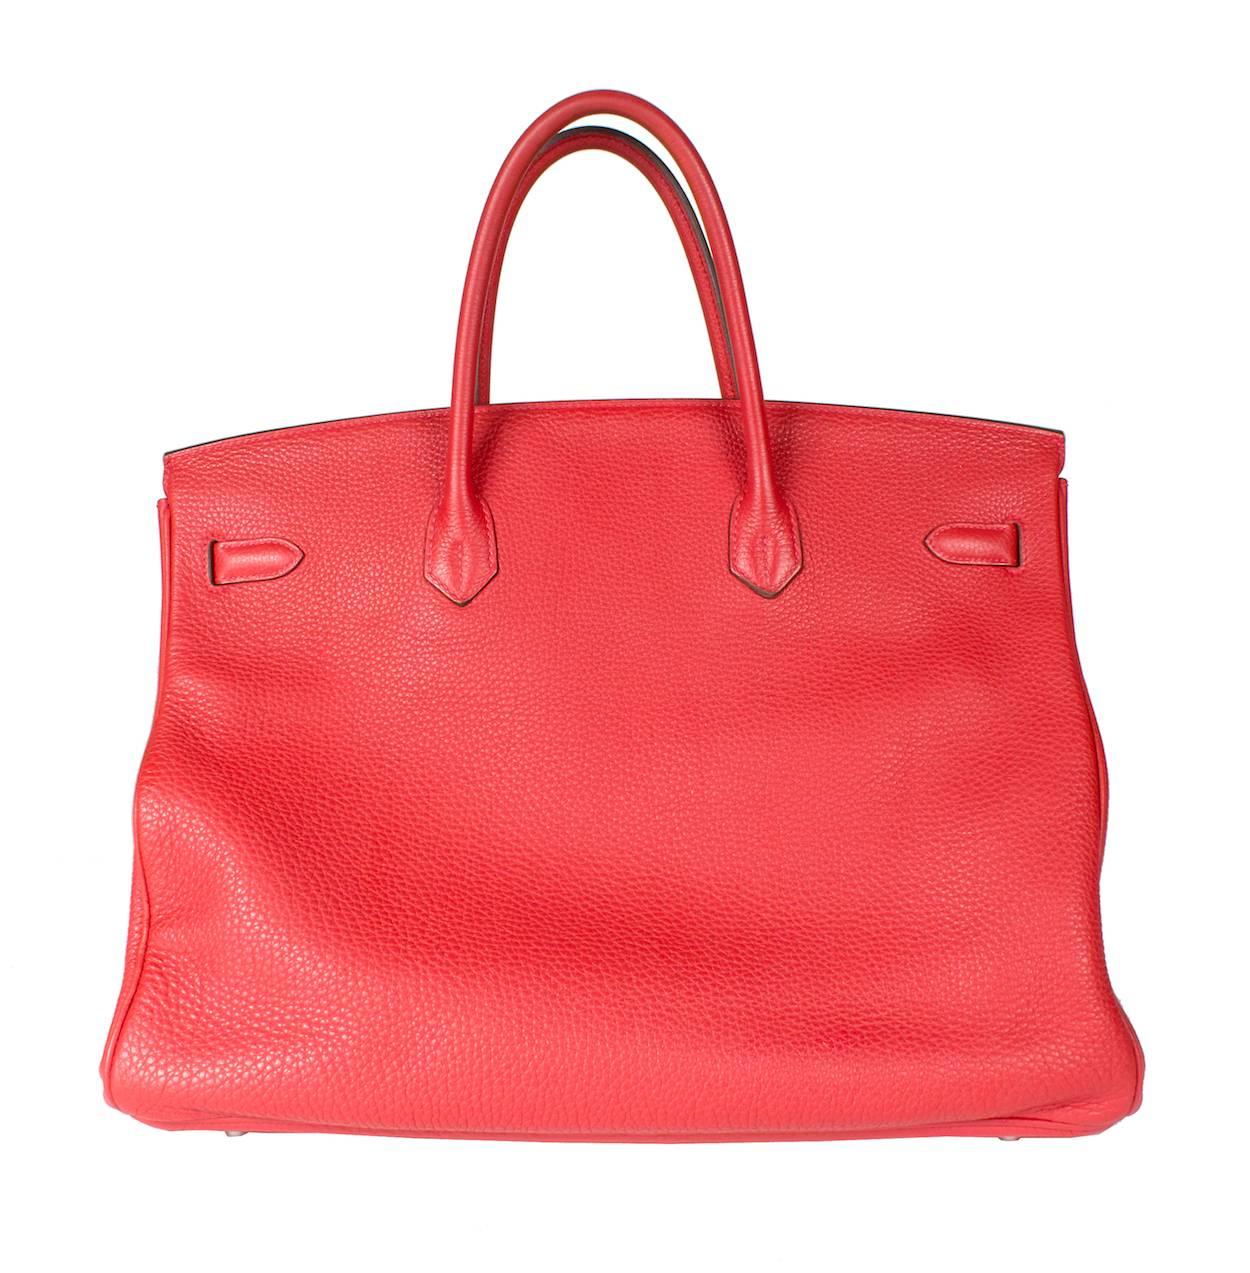 This is a 40cm Birkin bag by Hermes from 2012.  It is in geranium red togo leather.  It includes a dust bag, lock and key, and a raincoat.

4